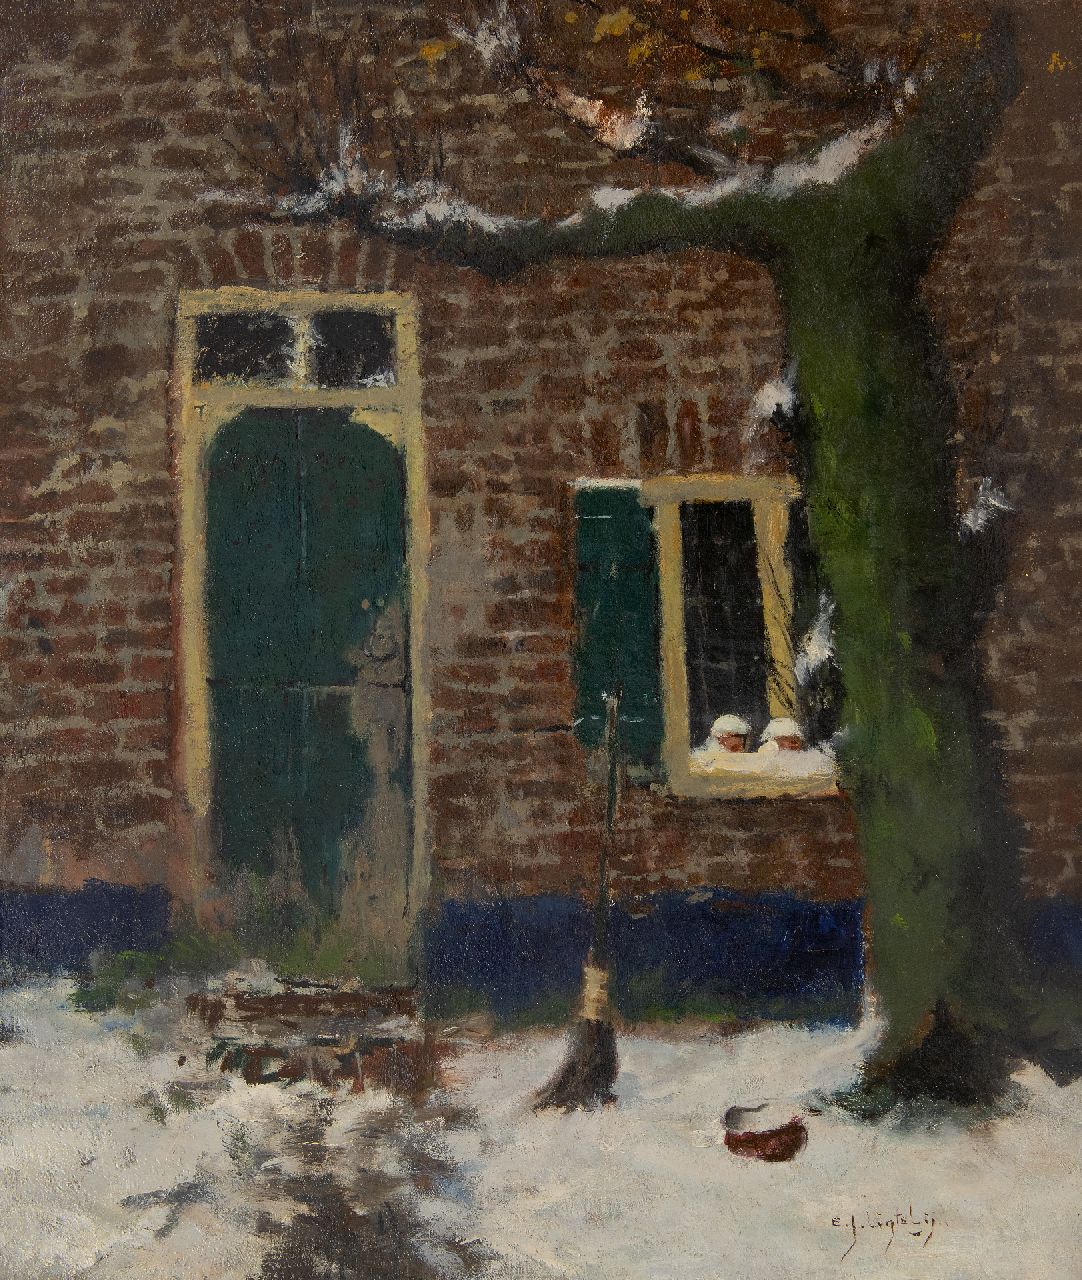 Ligtelijn E.J.  | Evert Jan Ligtelijn | Paintings offered for sale | Backyard of a farm in the snow, oil on canvas 60.3 x 50.3 cm, signed l.r. and without frame